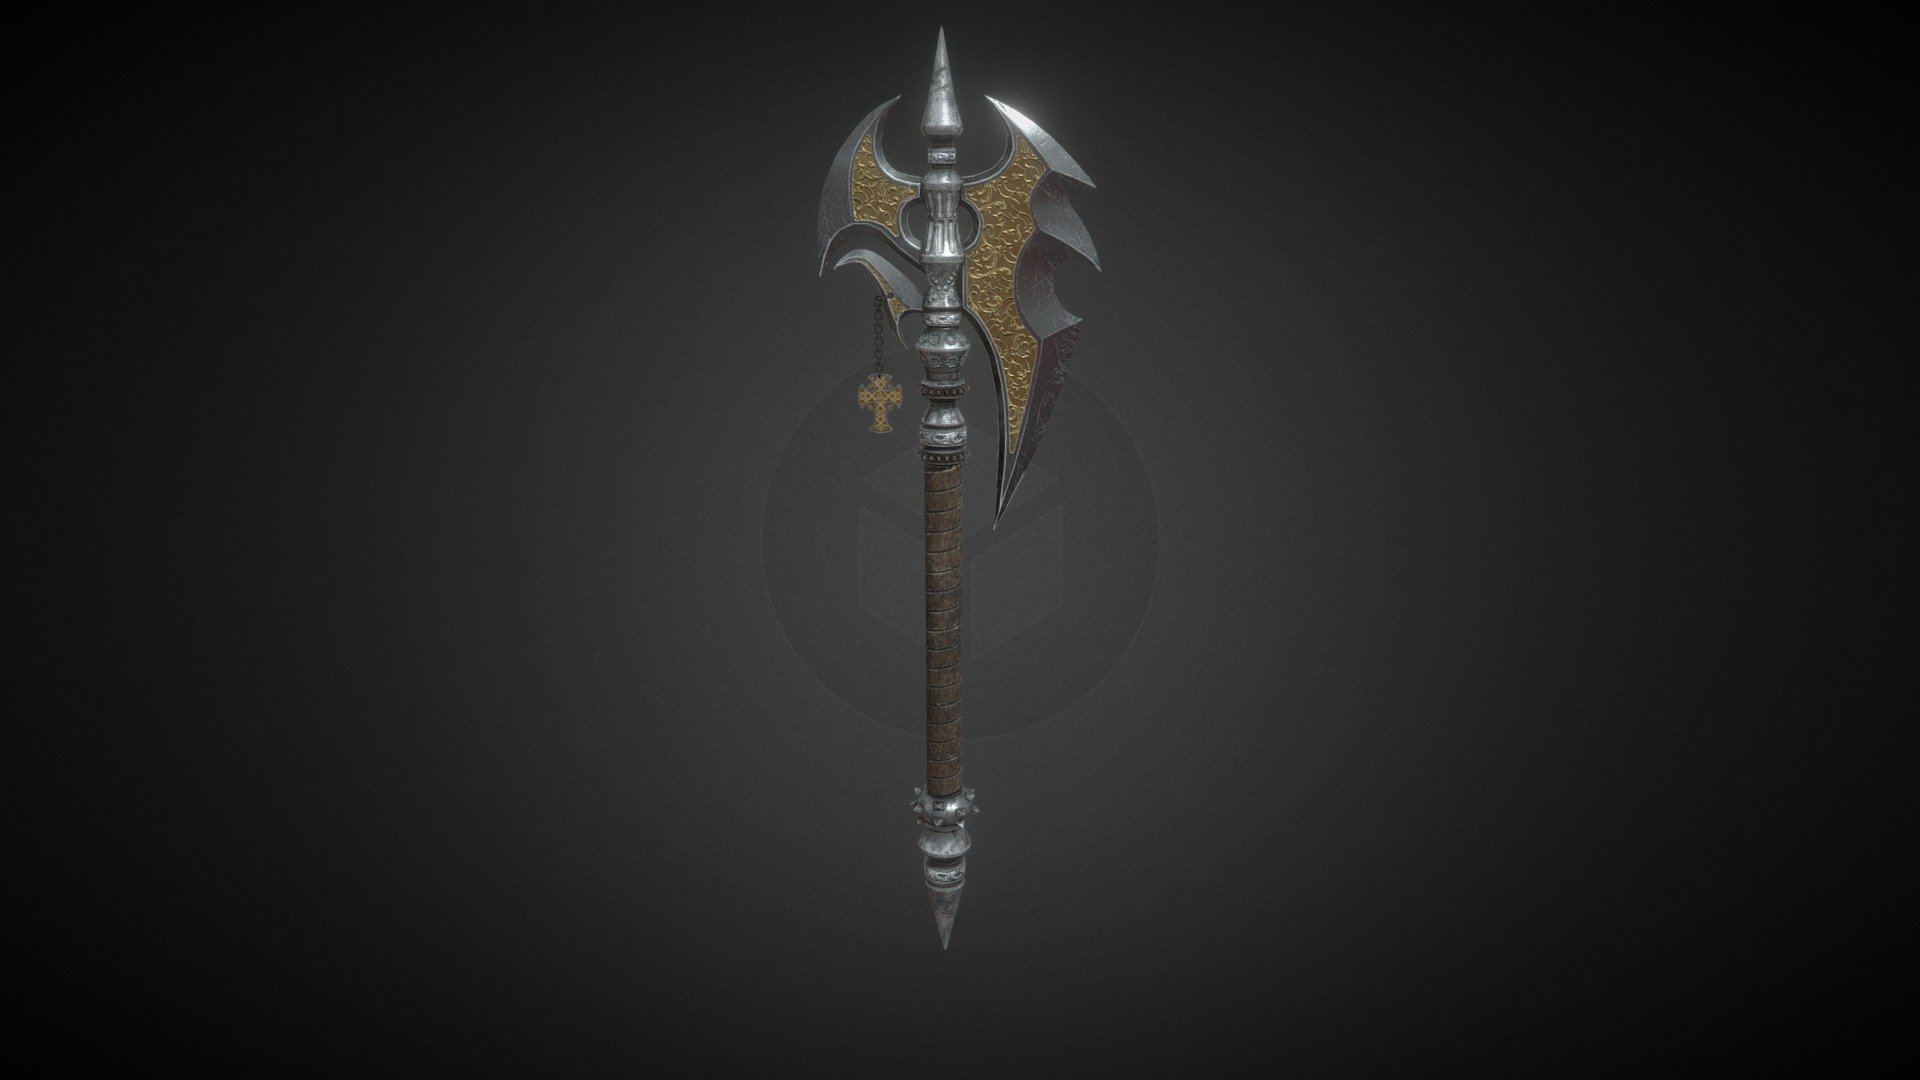 Battle Axe made in Blender and Textured in Substance 3D Painter. The model has a poly count of 3,810 and a 4K texture set. You can contact me for the 2K texture set 3d model